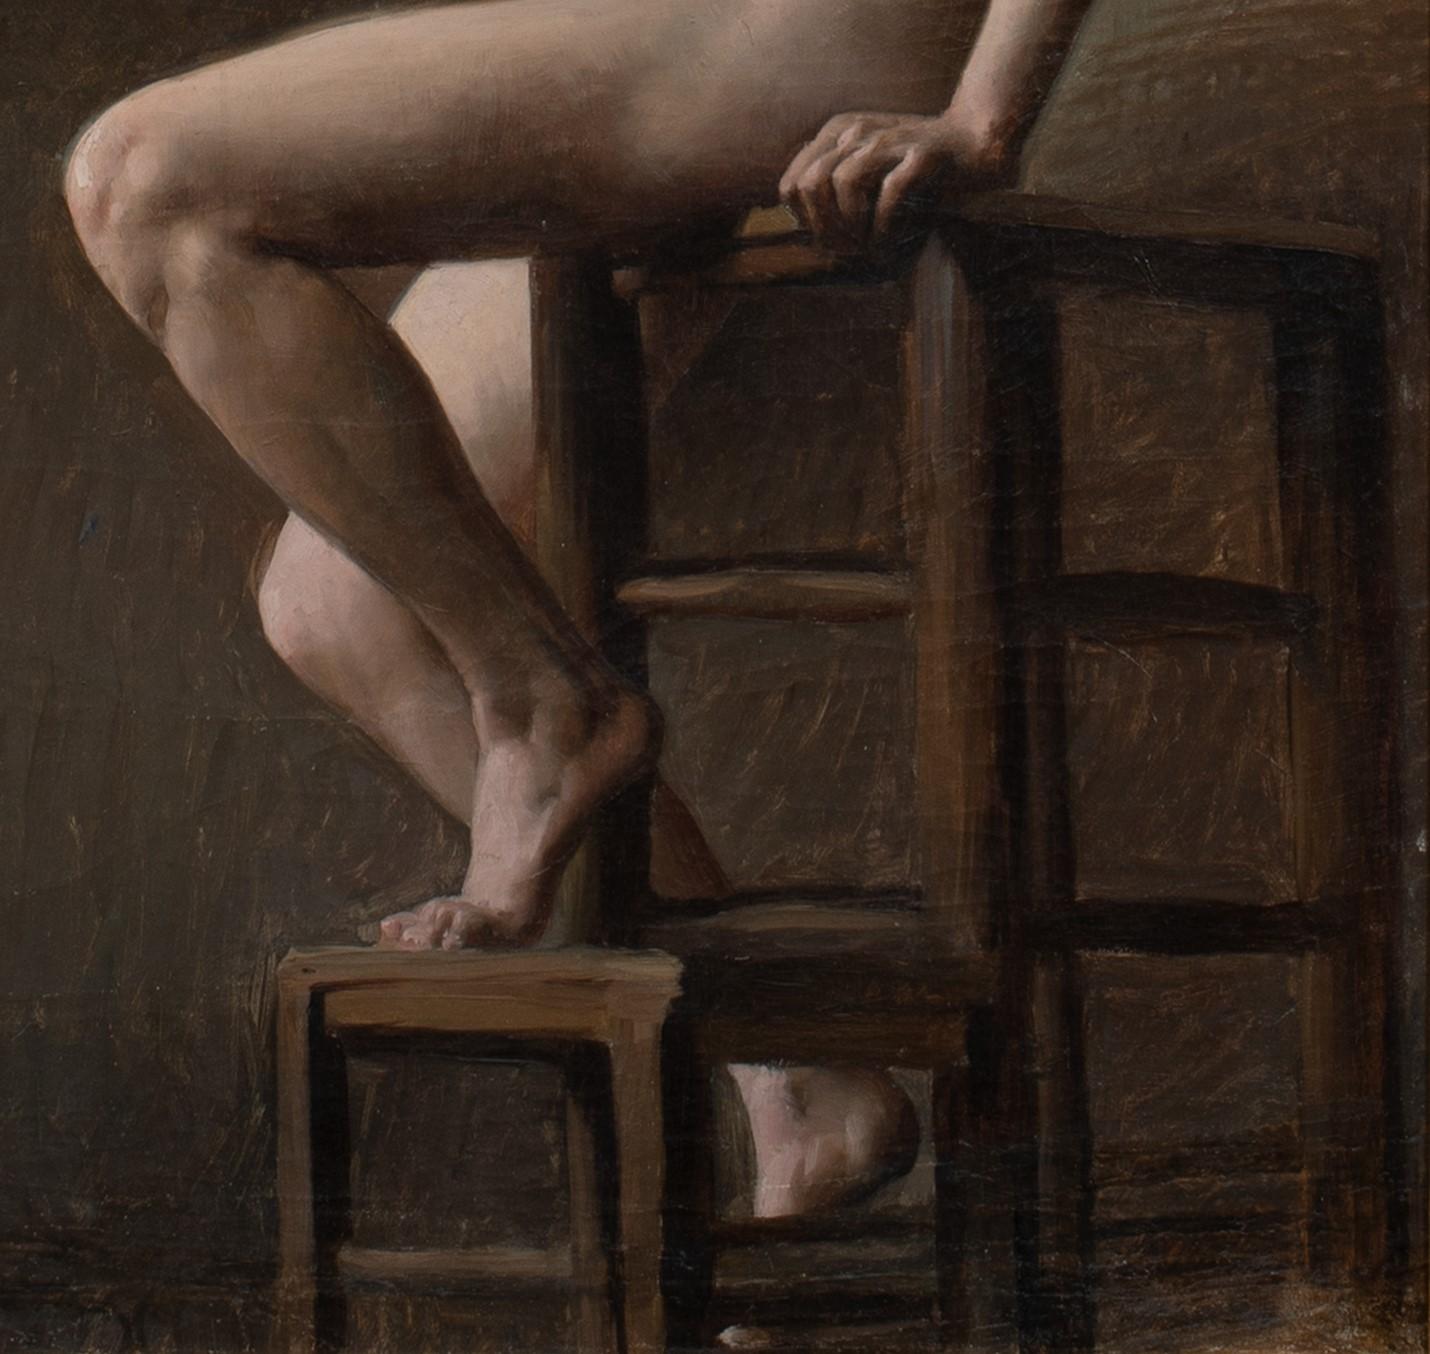 Study Of A Nude Woman Seated, 19th century

French Academy circa 1880 - circle of Jules Alexis MUENIER (1863-1942)

Fine large 19th century French academy study of a nude lady seated upon a stool, oil on canvas. Excellent quality and condition study